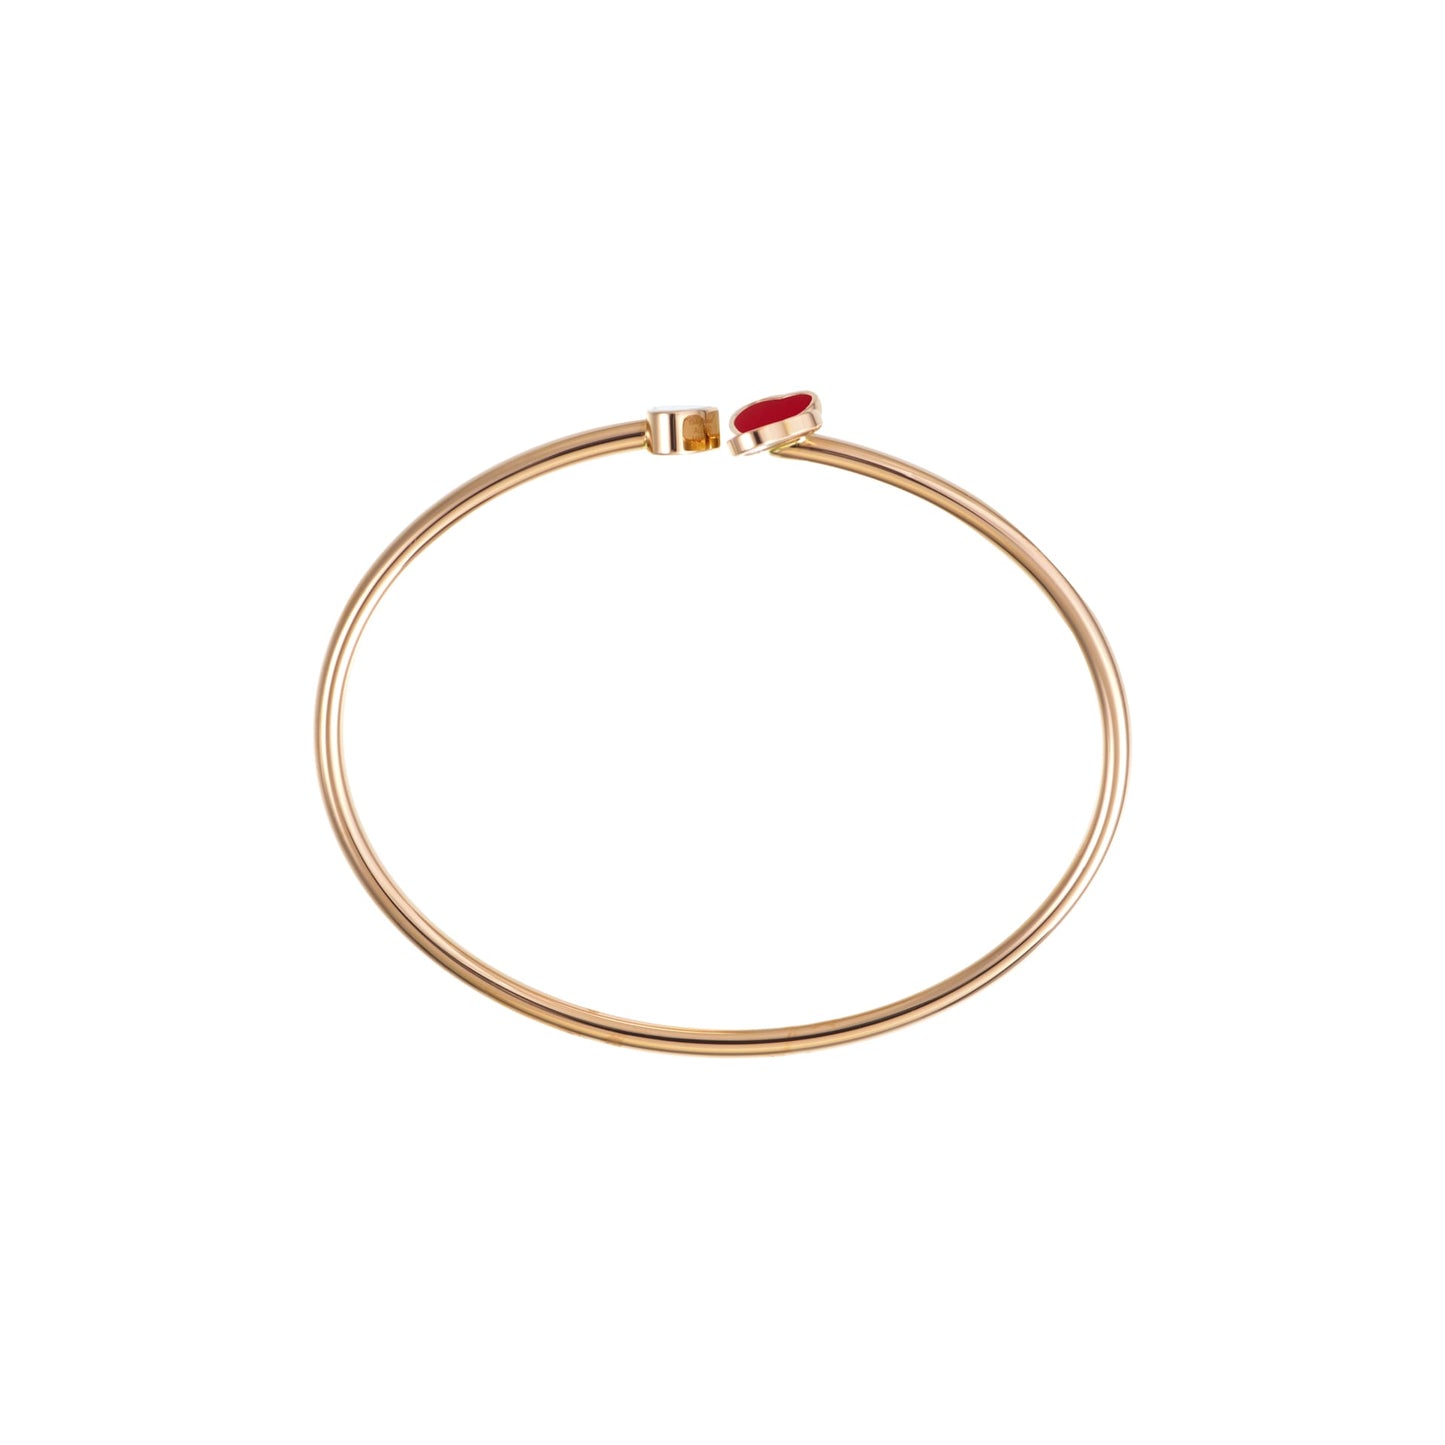 HAPPY HEARTS WINGS BANGLE, ETHICAL ROSE GOLD, DIAMOND, RED STONE 85A083-5800